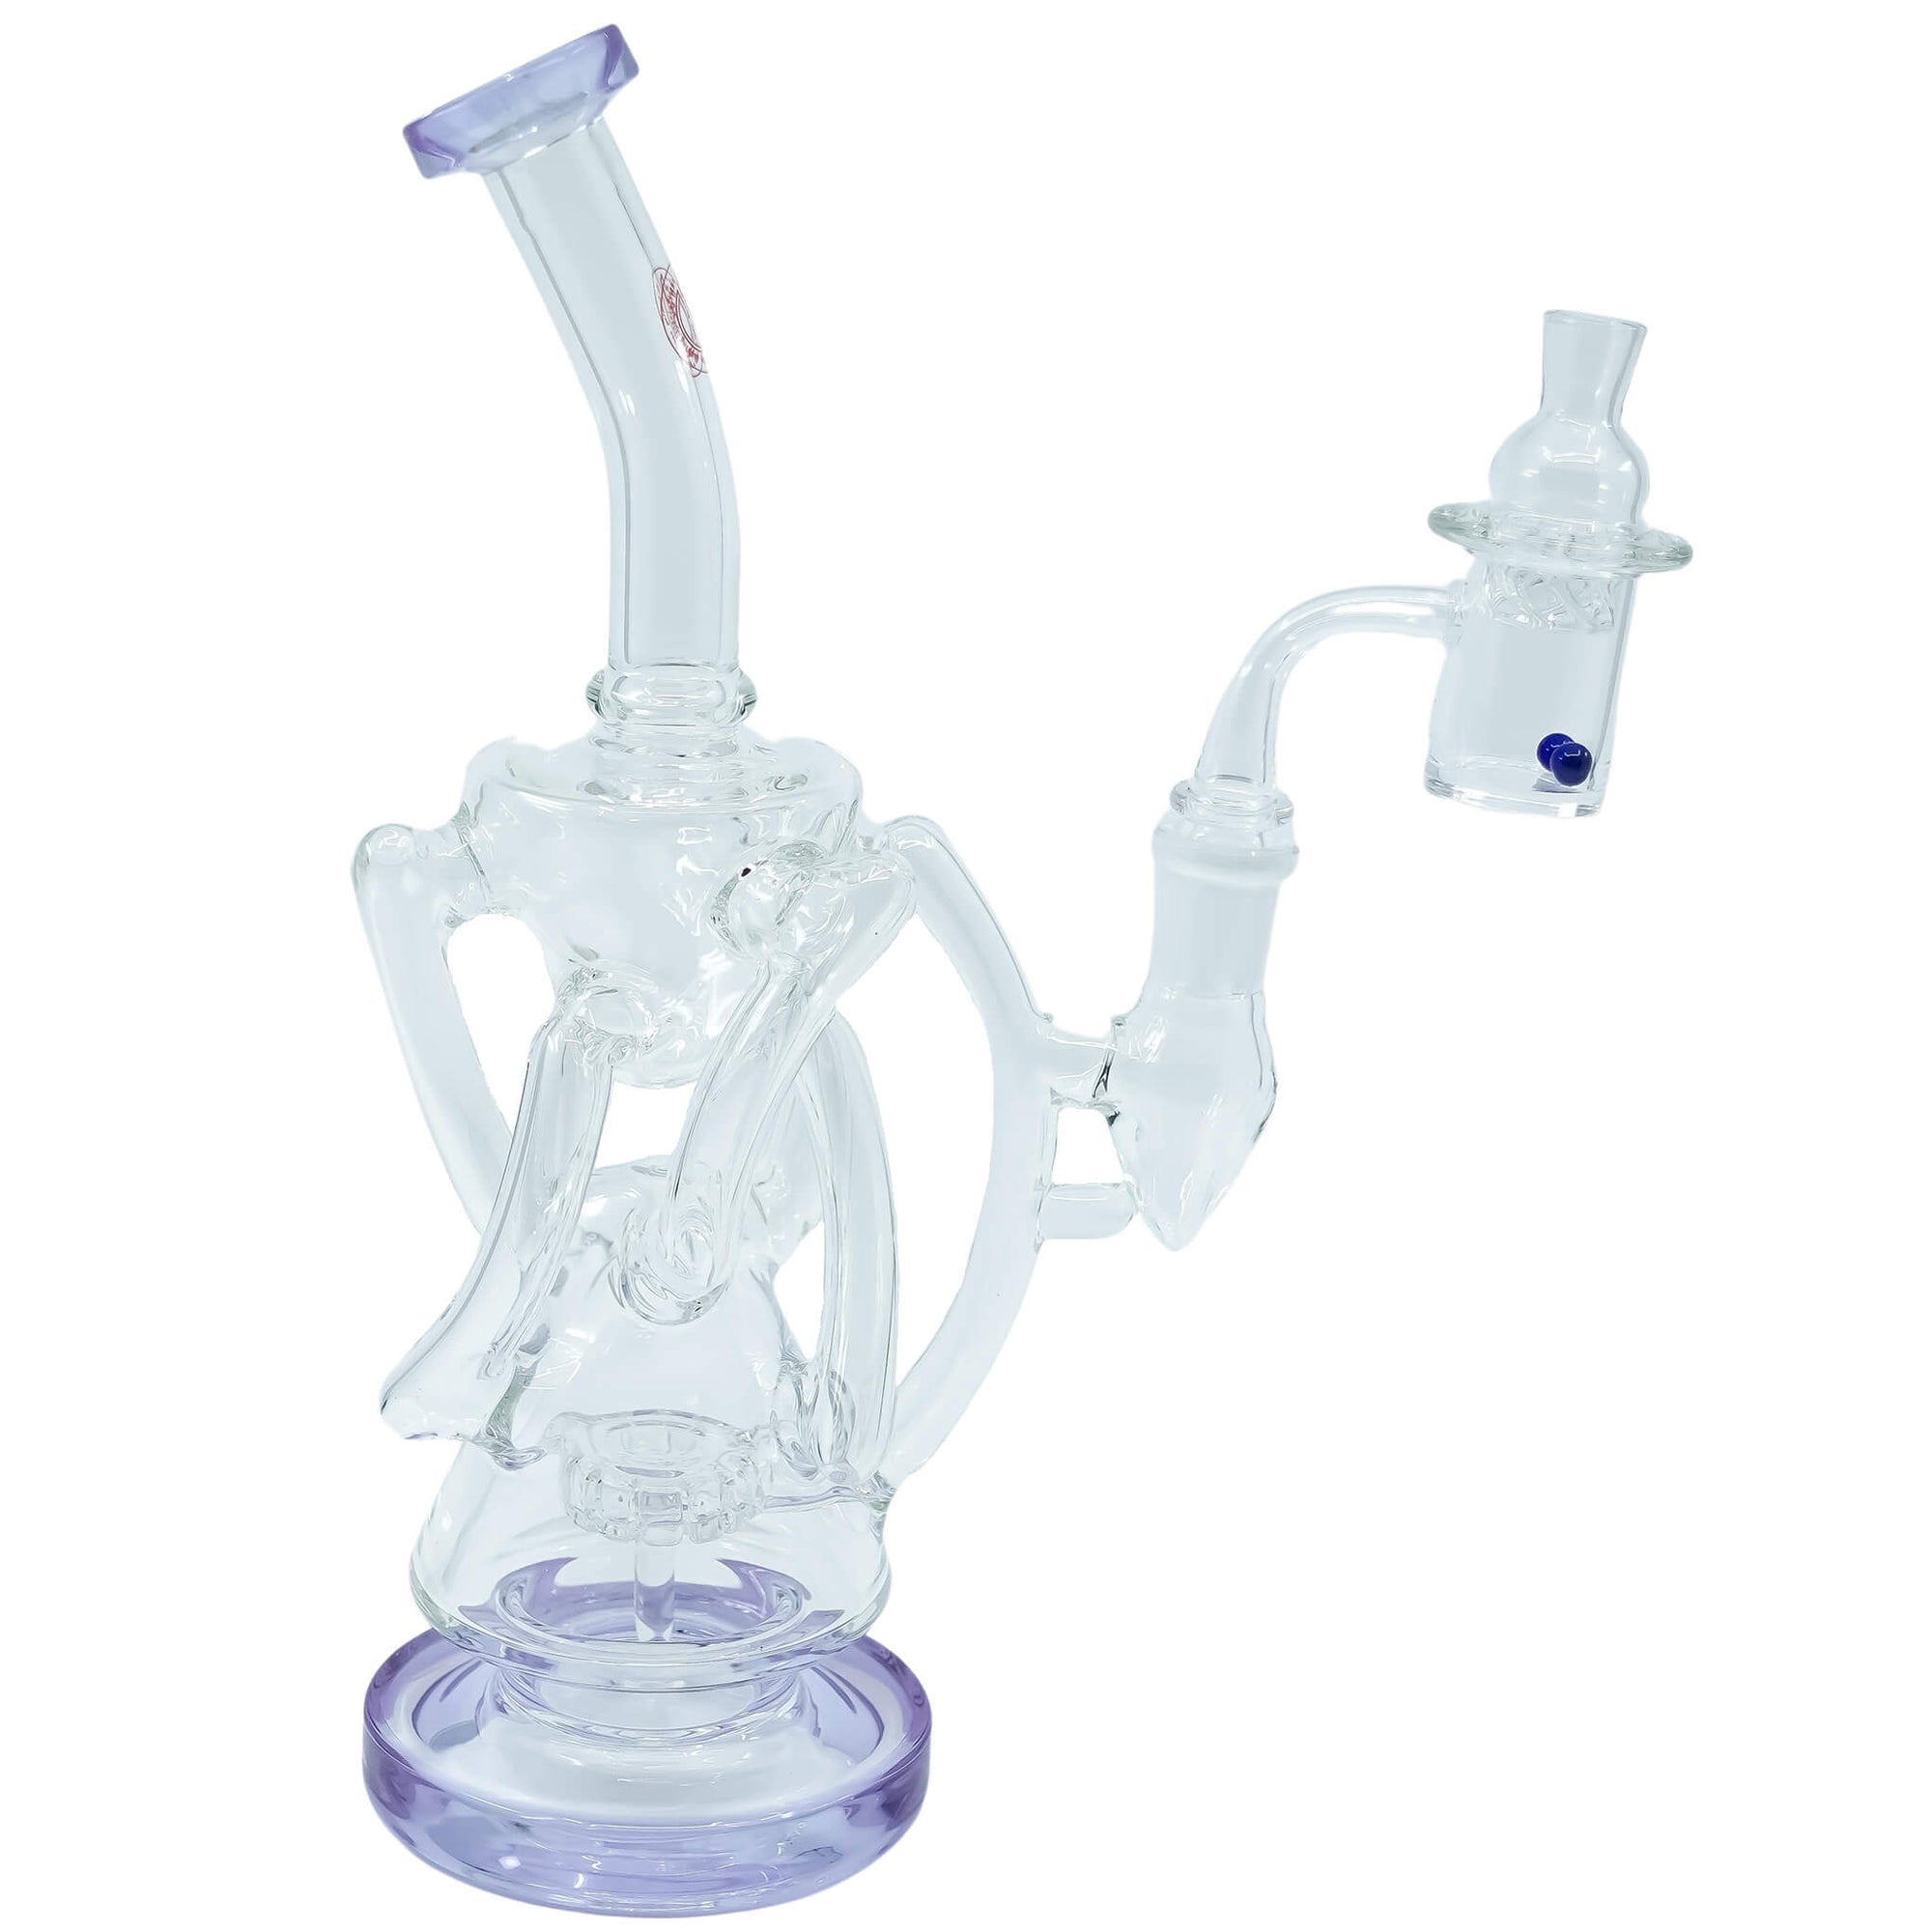 Trifecta 25mm Handmade Joint Complete Dabbing Kit #1 | Purple With SiC Pearls View | DW